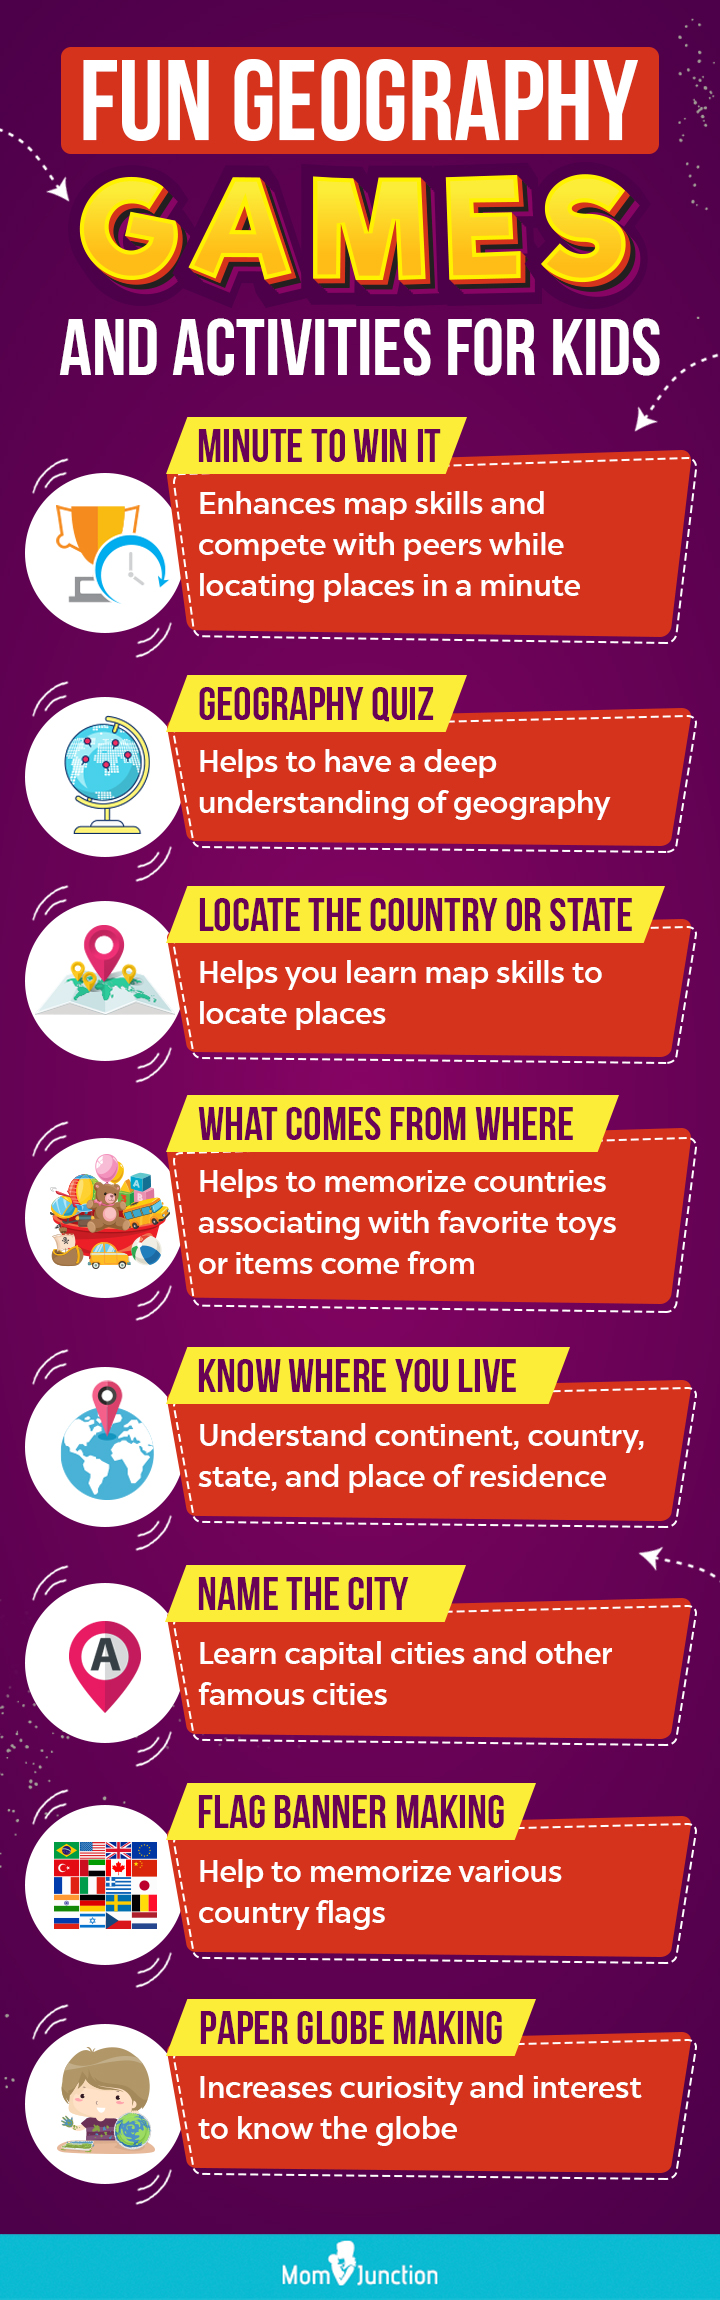 9 Free Online Geography Games for Kids: 9 Fun Ways to Learn the World!